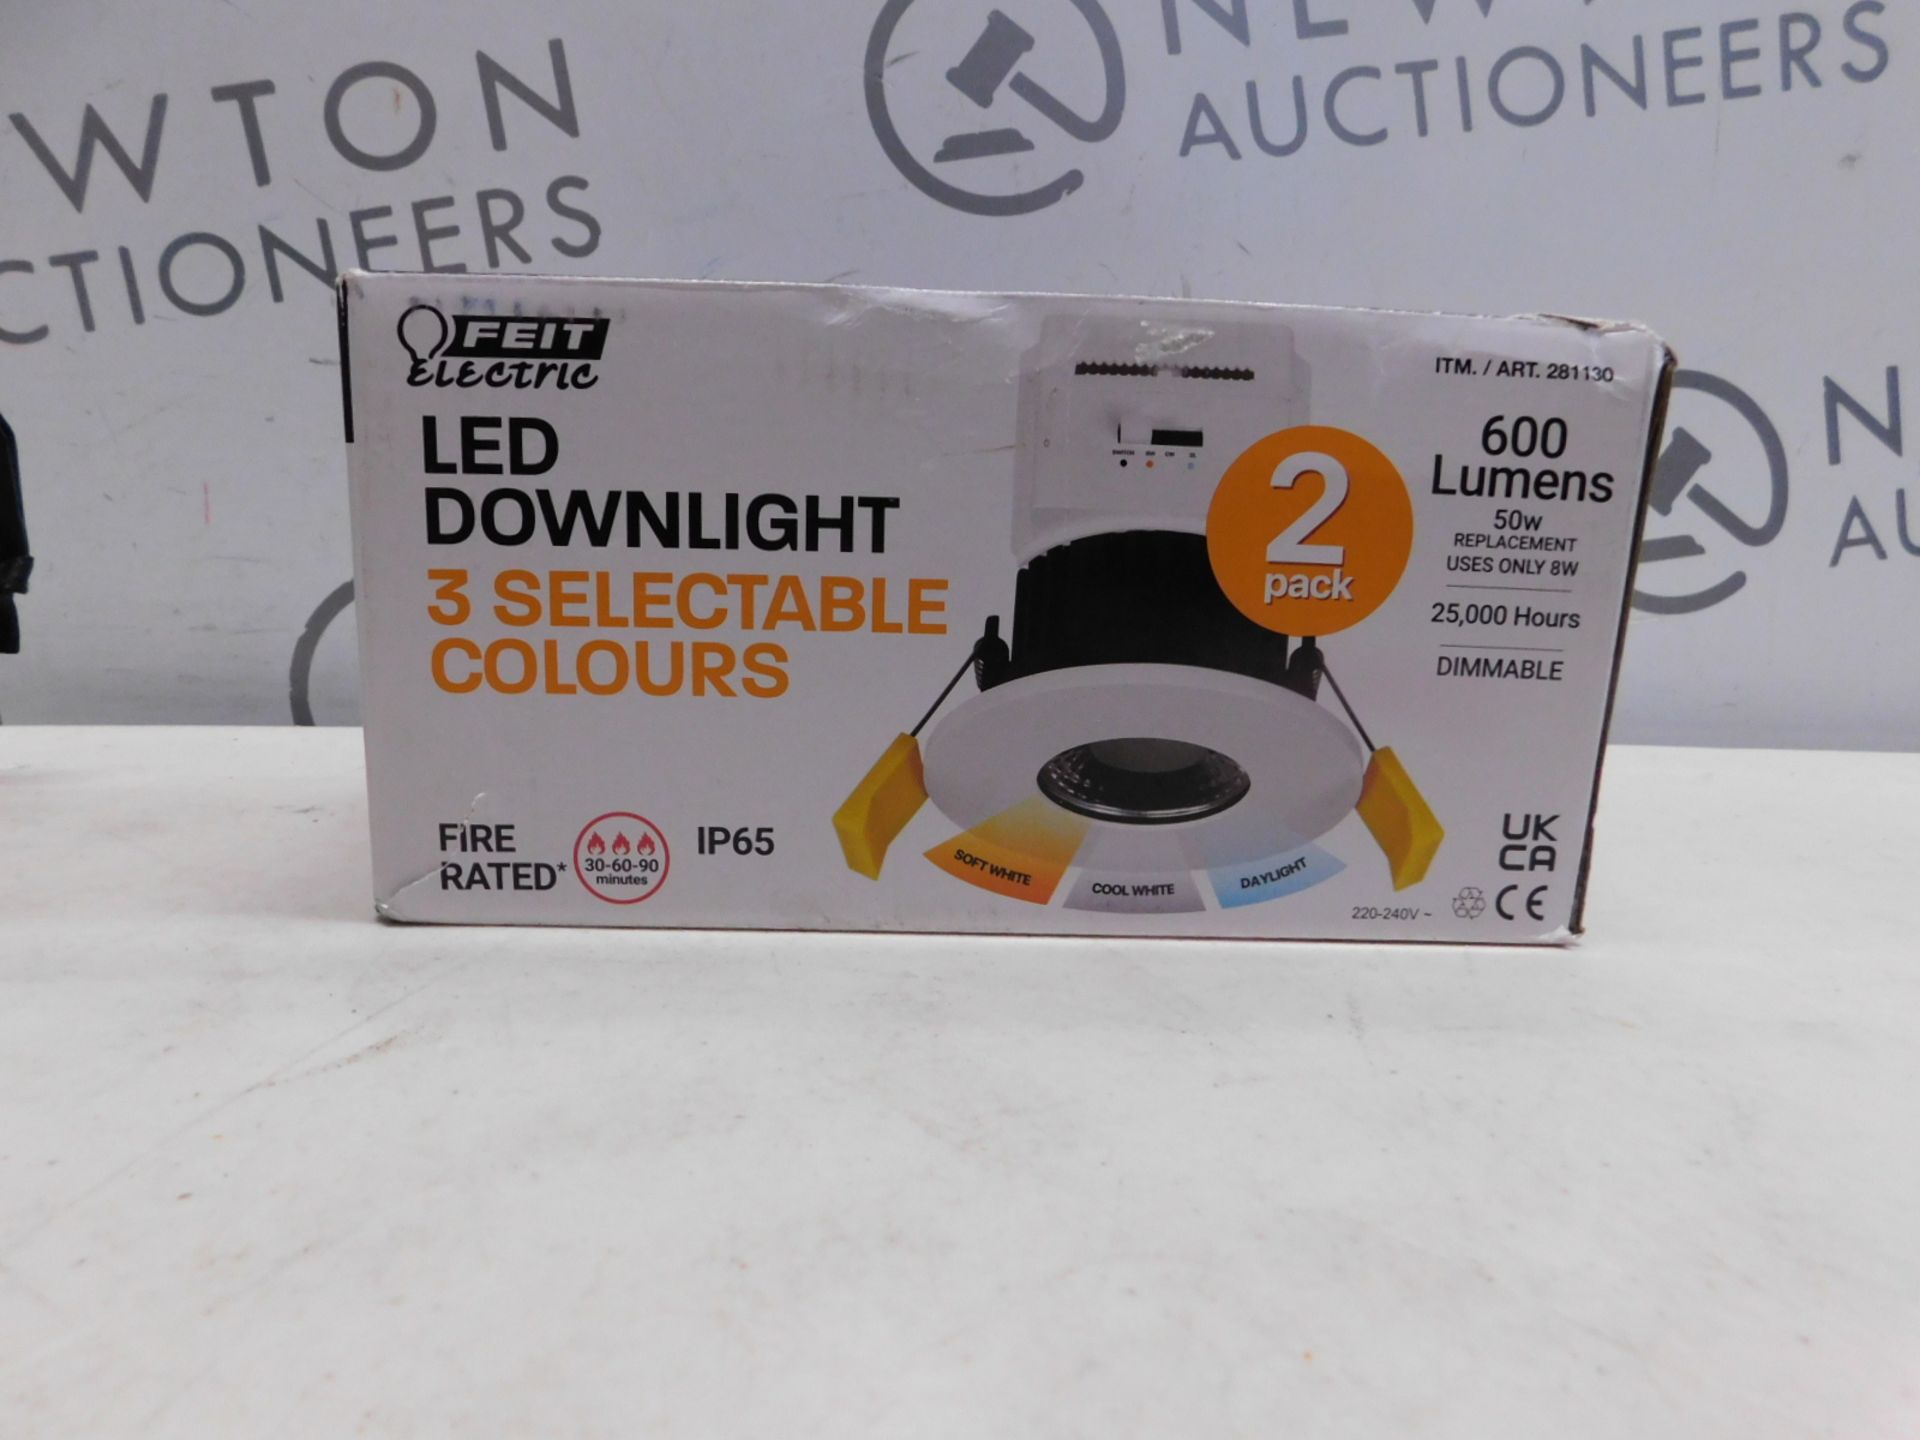 1 BOXED 2PK FEIT ELECTRIC LED DOWNLIGHT WITH 3 SELECTABLE COLOURS RRP Â£39.99